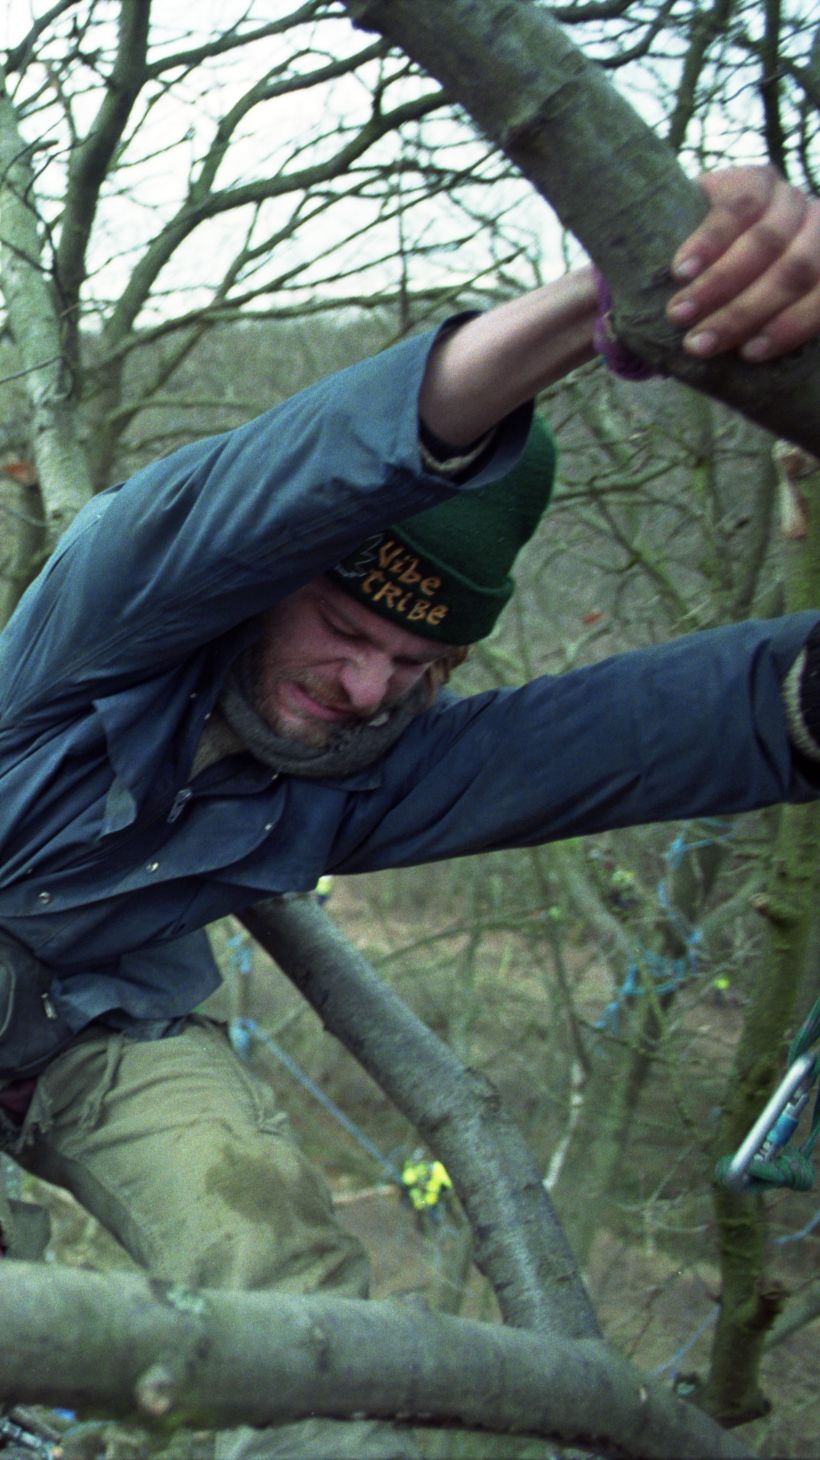 A white male protestor is pulled from a tree by climbers in Newbury, the UK